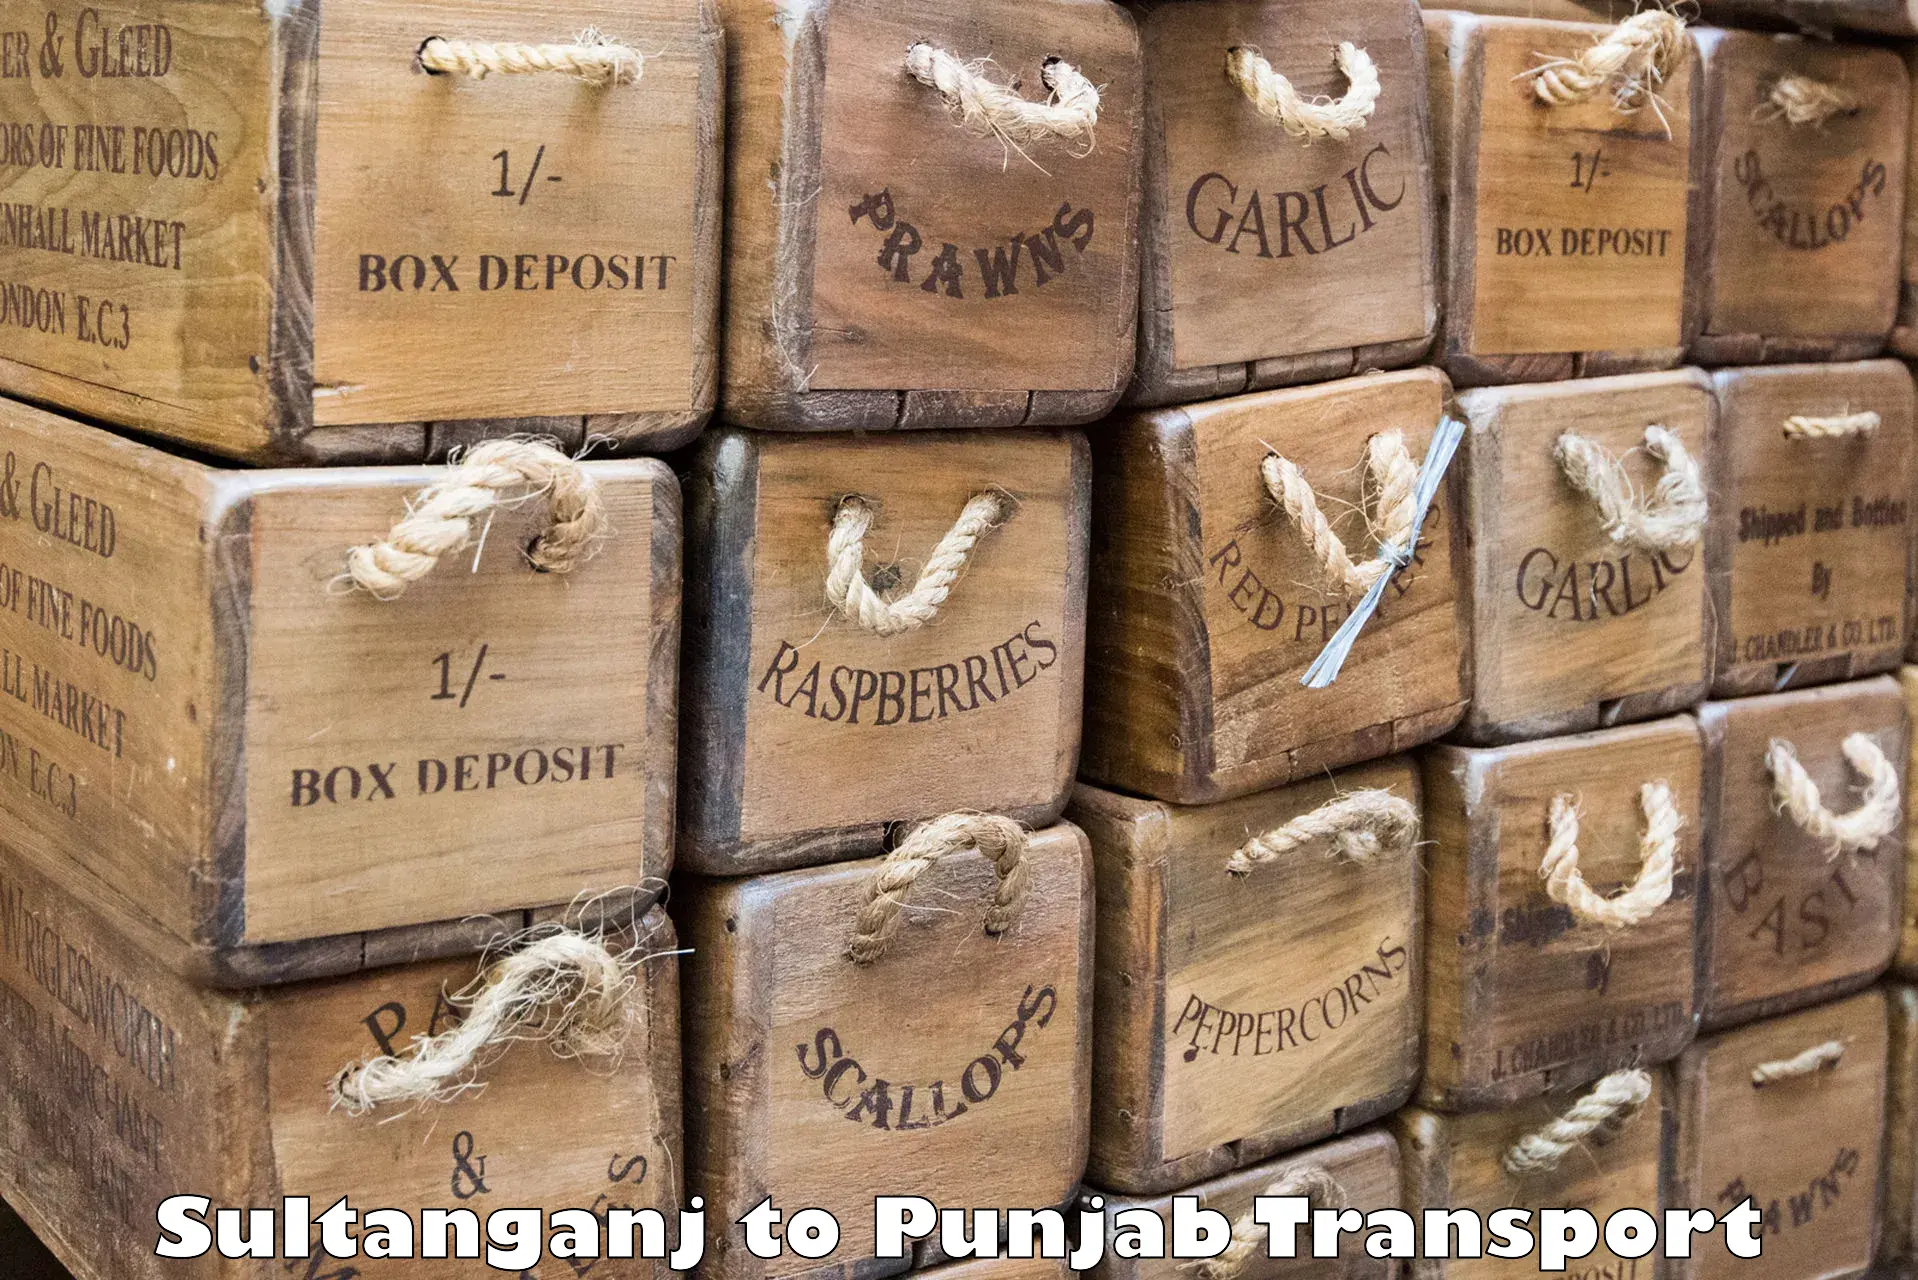 Air freight transport services Sultanganj to Pathankot